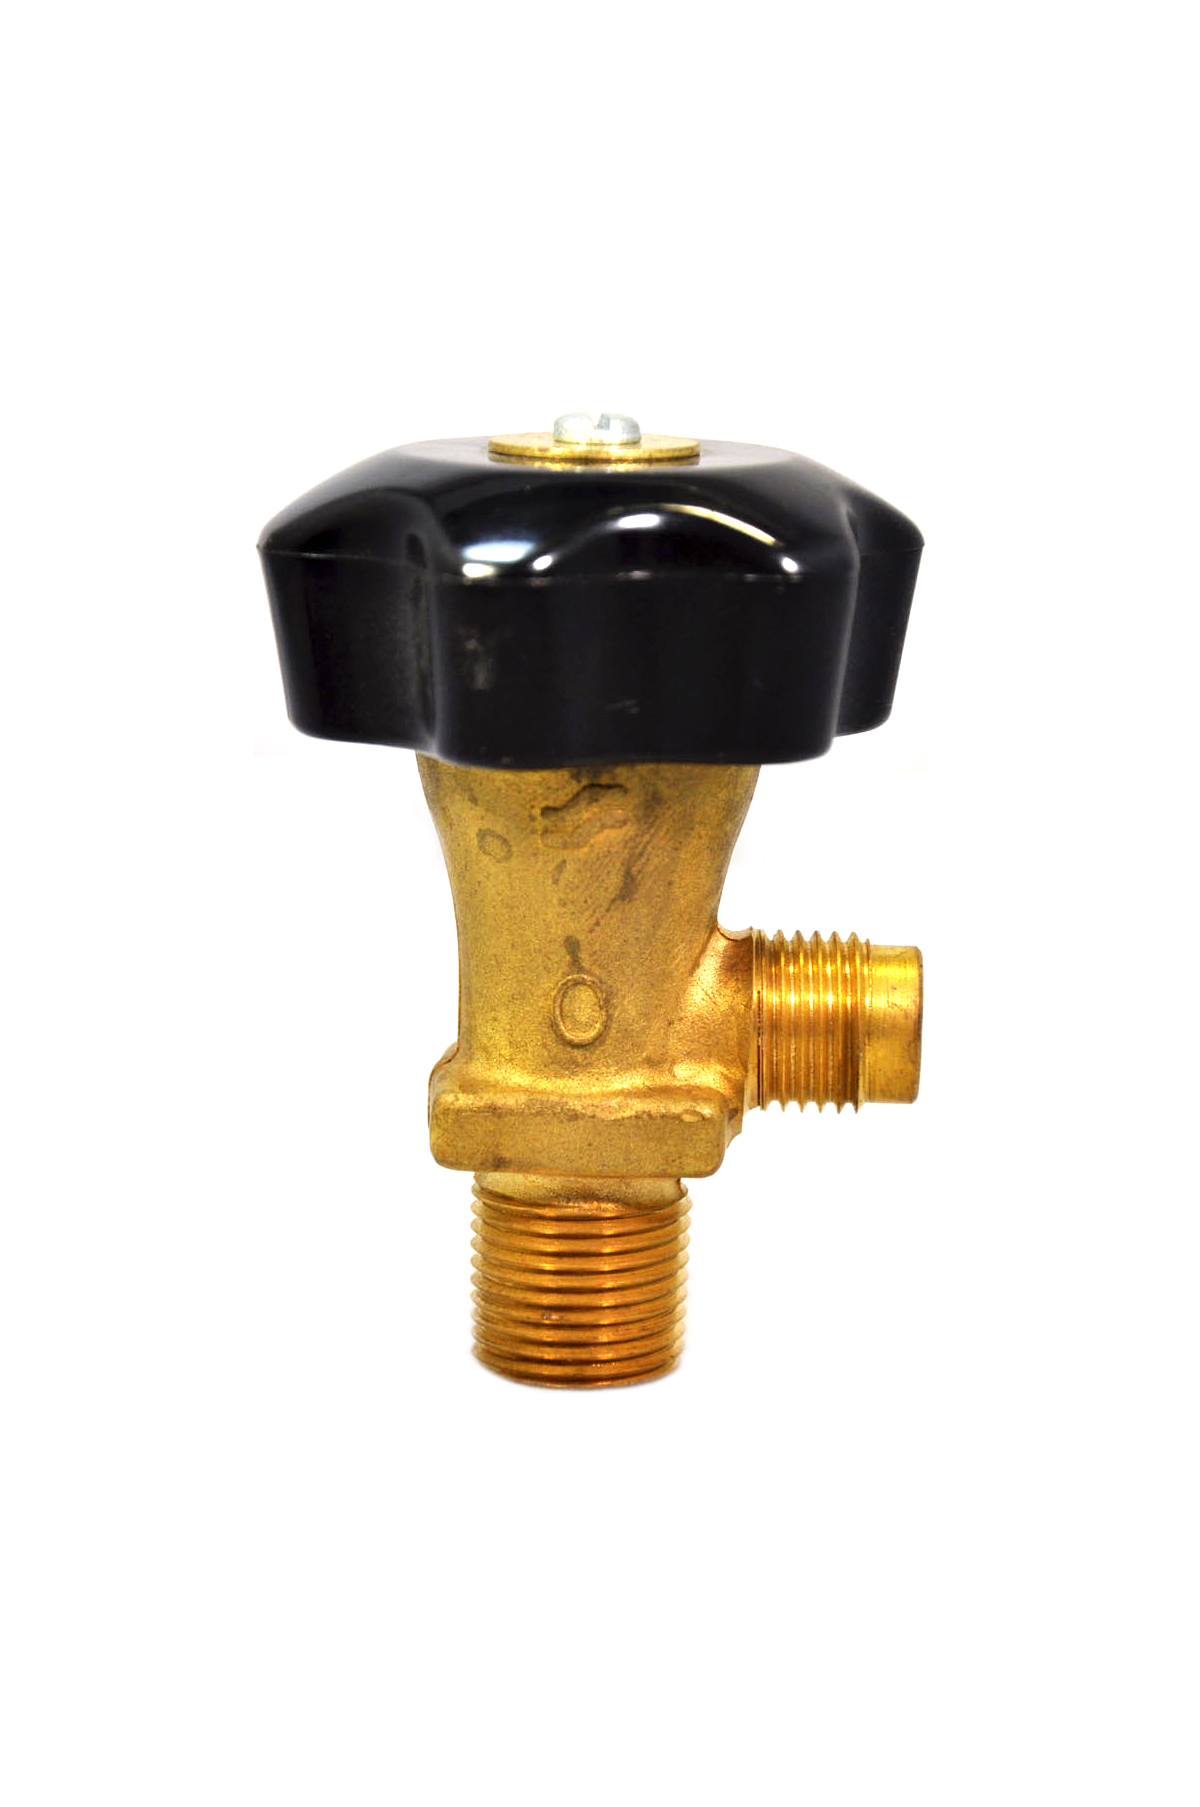 6411 Series - Diaphragm Packless - Lecture Bottle Valves